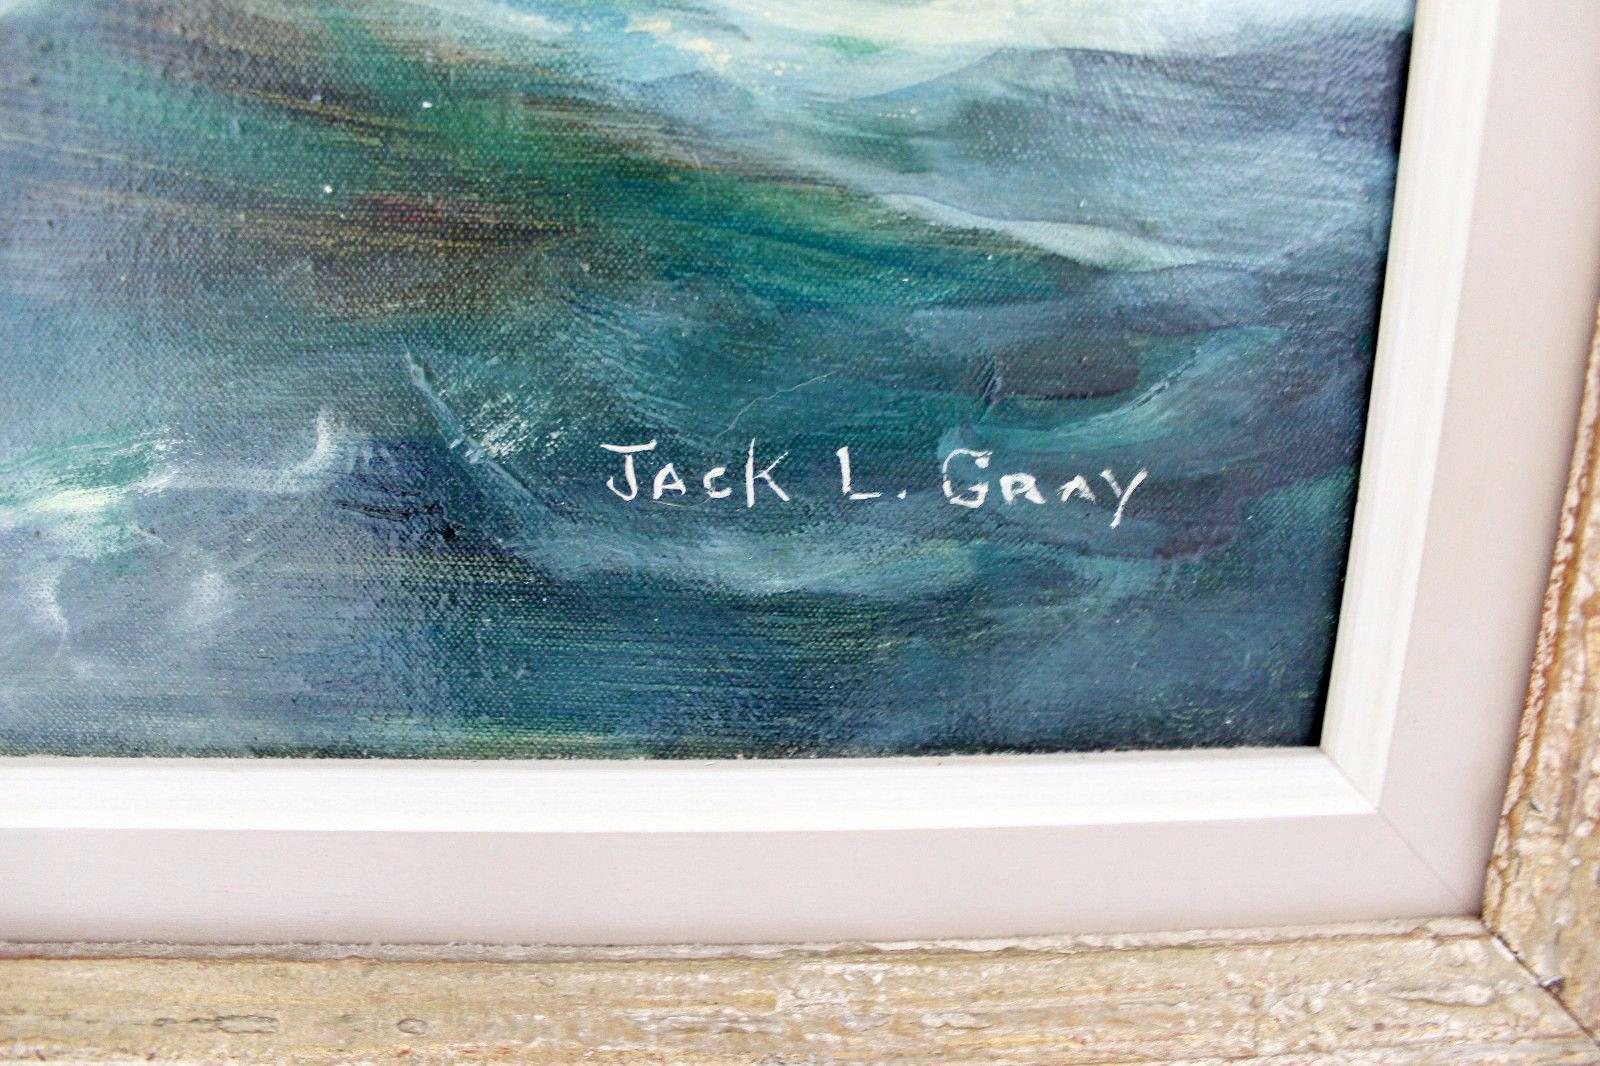 Jack Lorimer Gray, 1927-1981, was born in Halifax, Nova Scotia to Scottish parents. His talents as an artist were spotted by E. Wyly Grier while Gray was still a child. He attended the Nova Scotia College of Art for one year, but left to work on